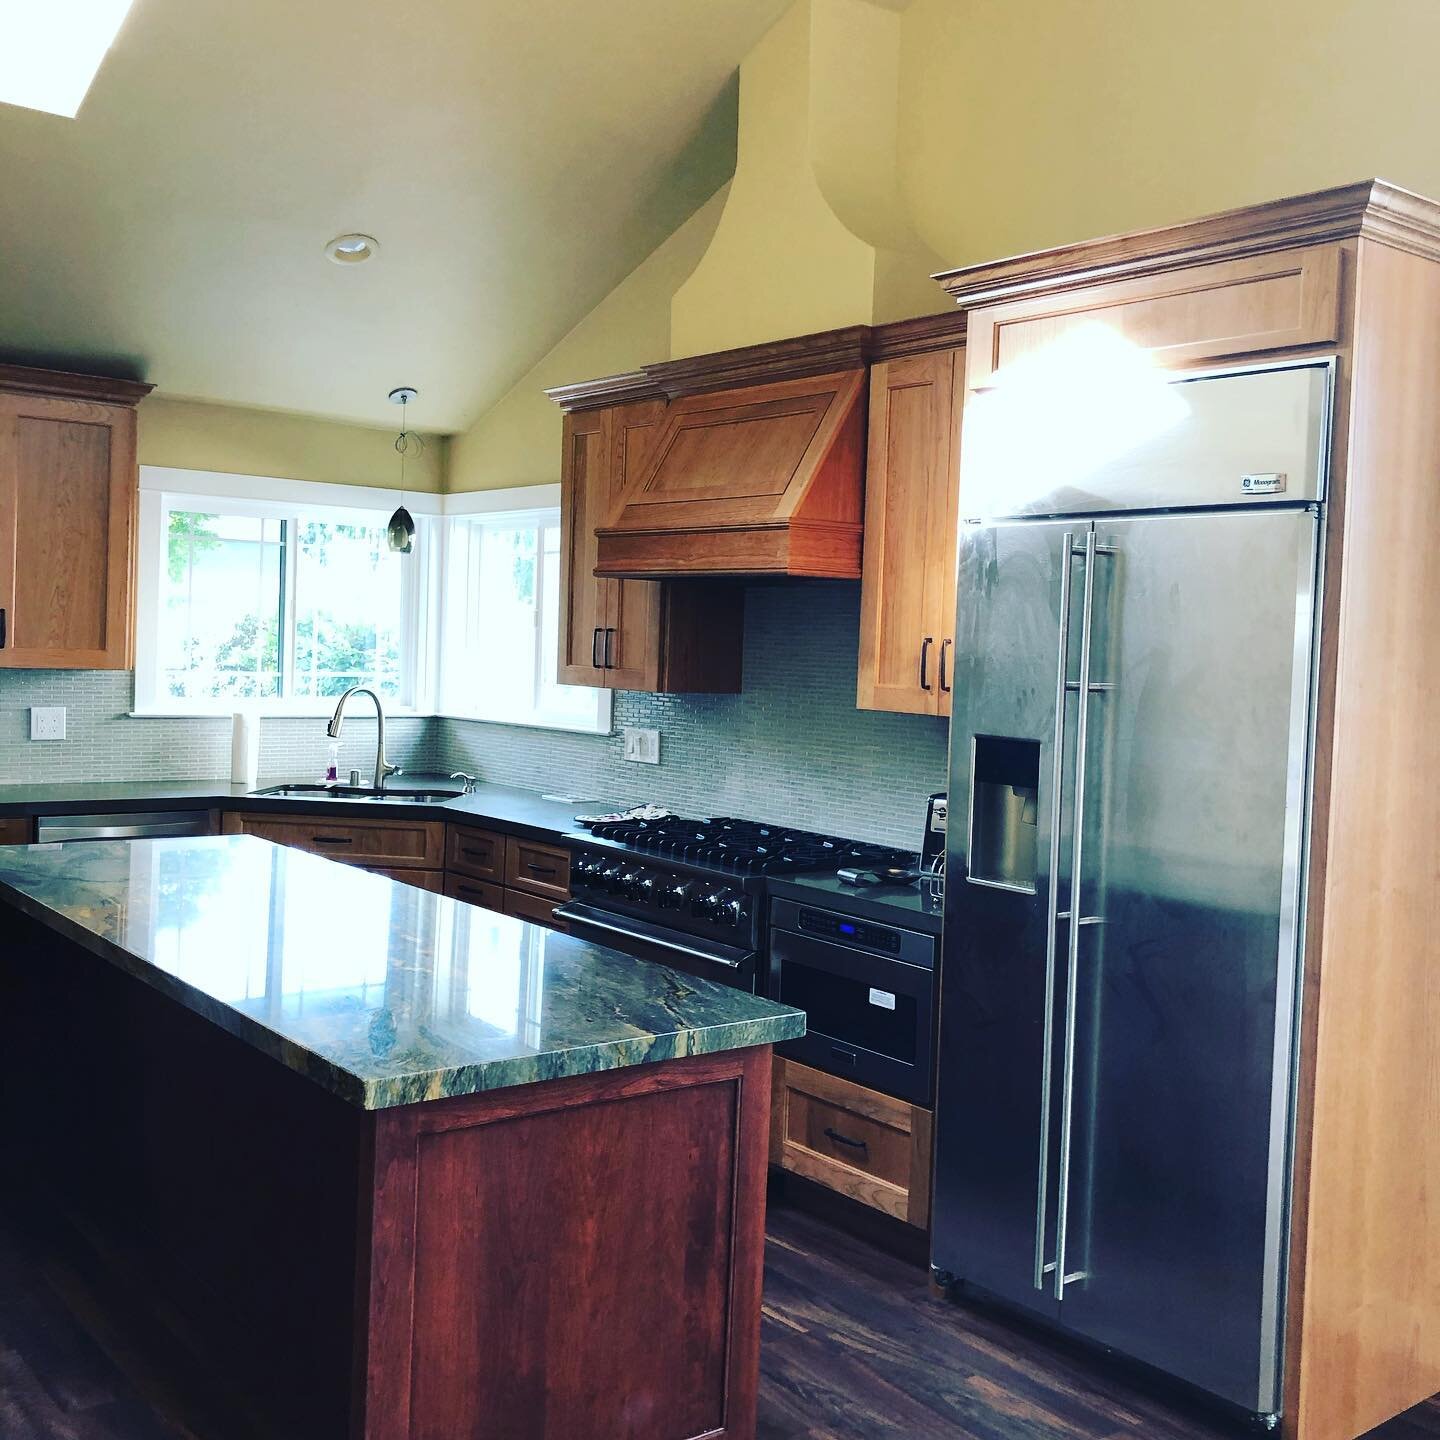 Kitchen remodeled by RSGM construction inc.